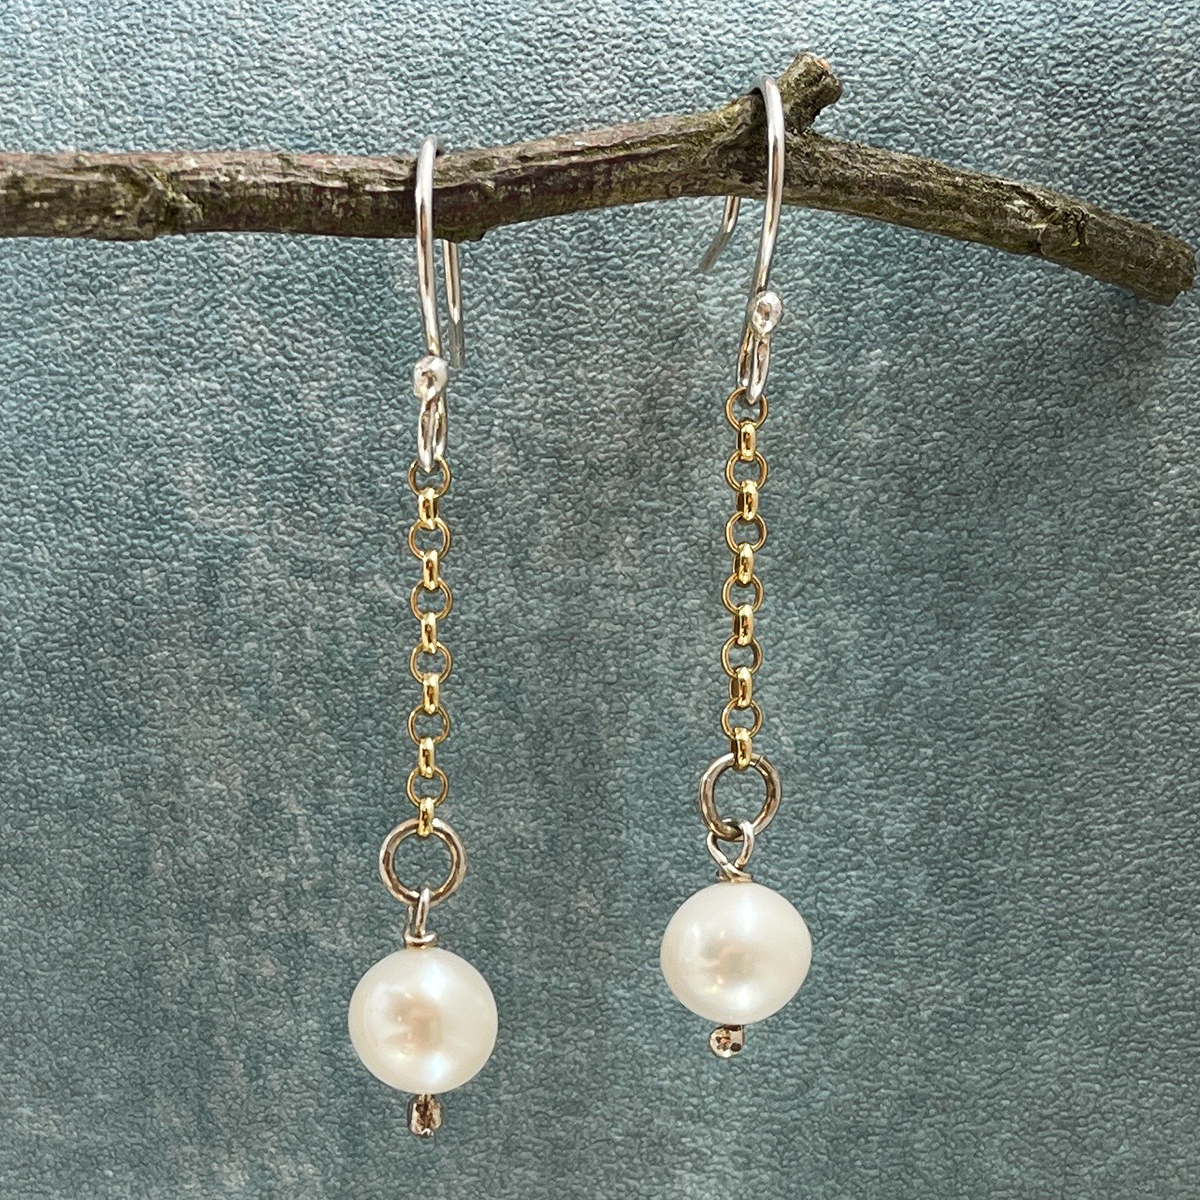 Pearla - Gold Filled Chain with Fresh Water Pearl Silver Earrings - Dangle